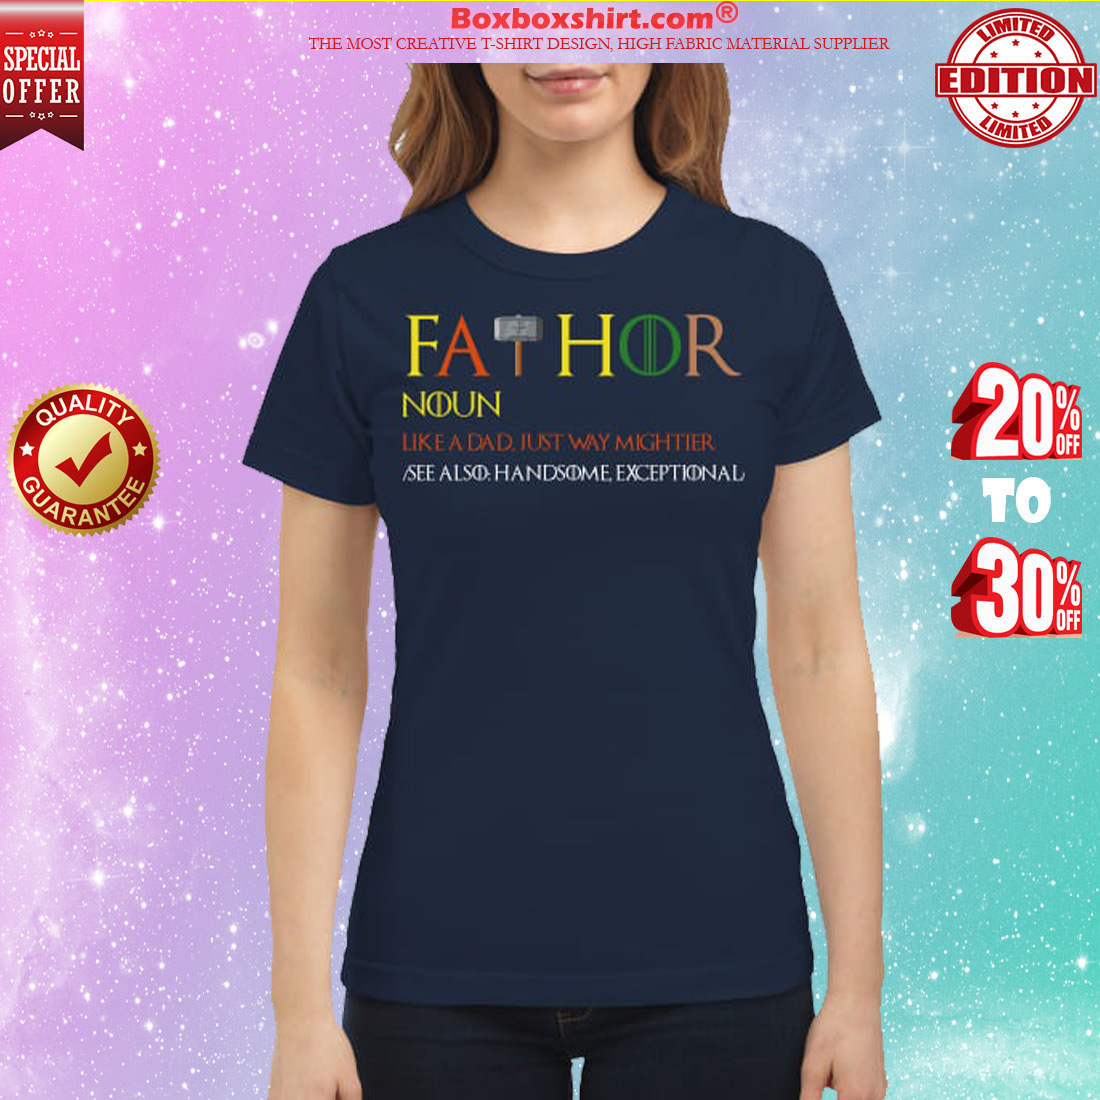 Game of Thrones fathor like a dad just way mightier classic shirt